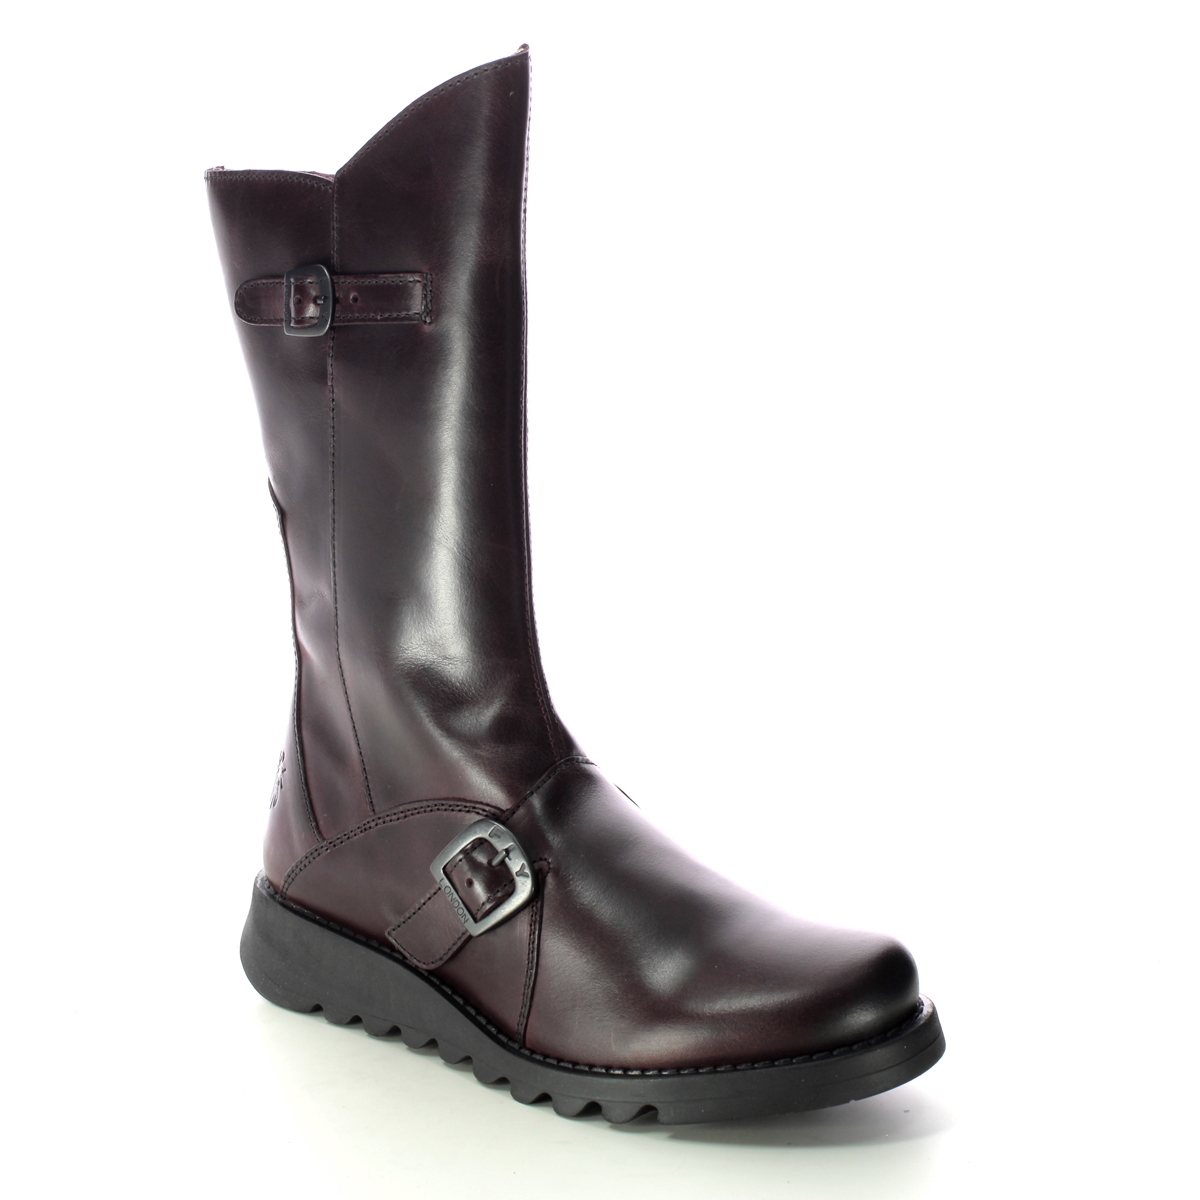 Fly London Mes 2 Wine leather Womens Mid Calf Boots P142913-032 in a Plain Leather in Size 37